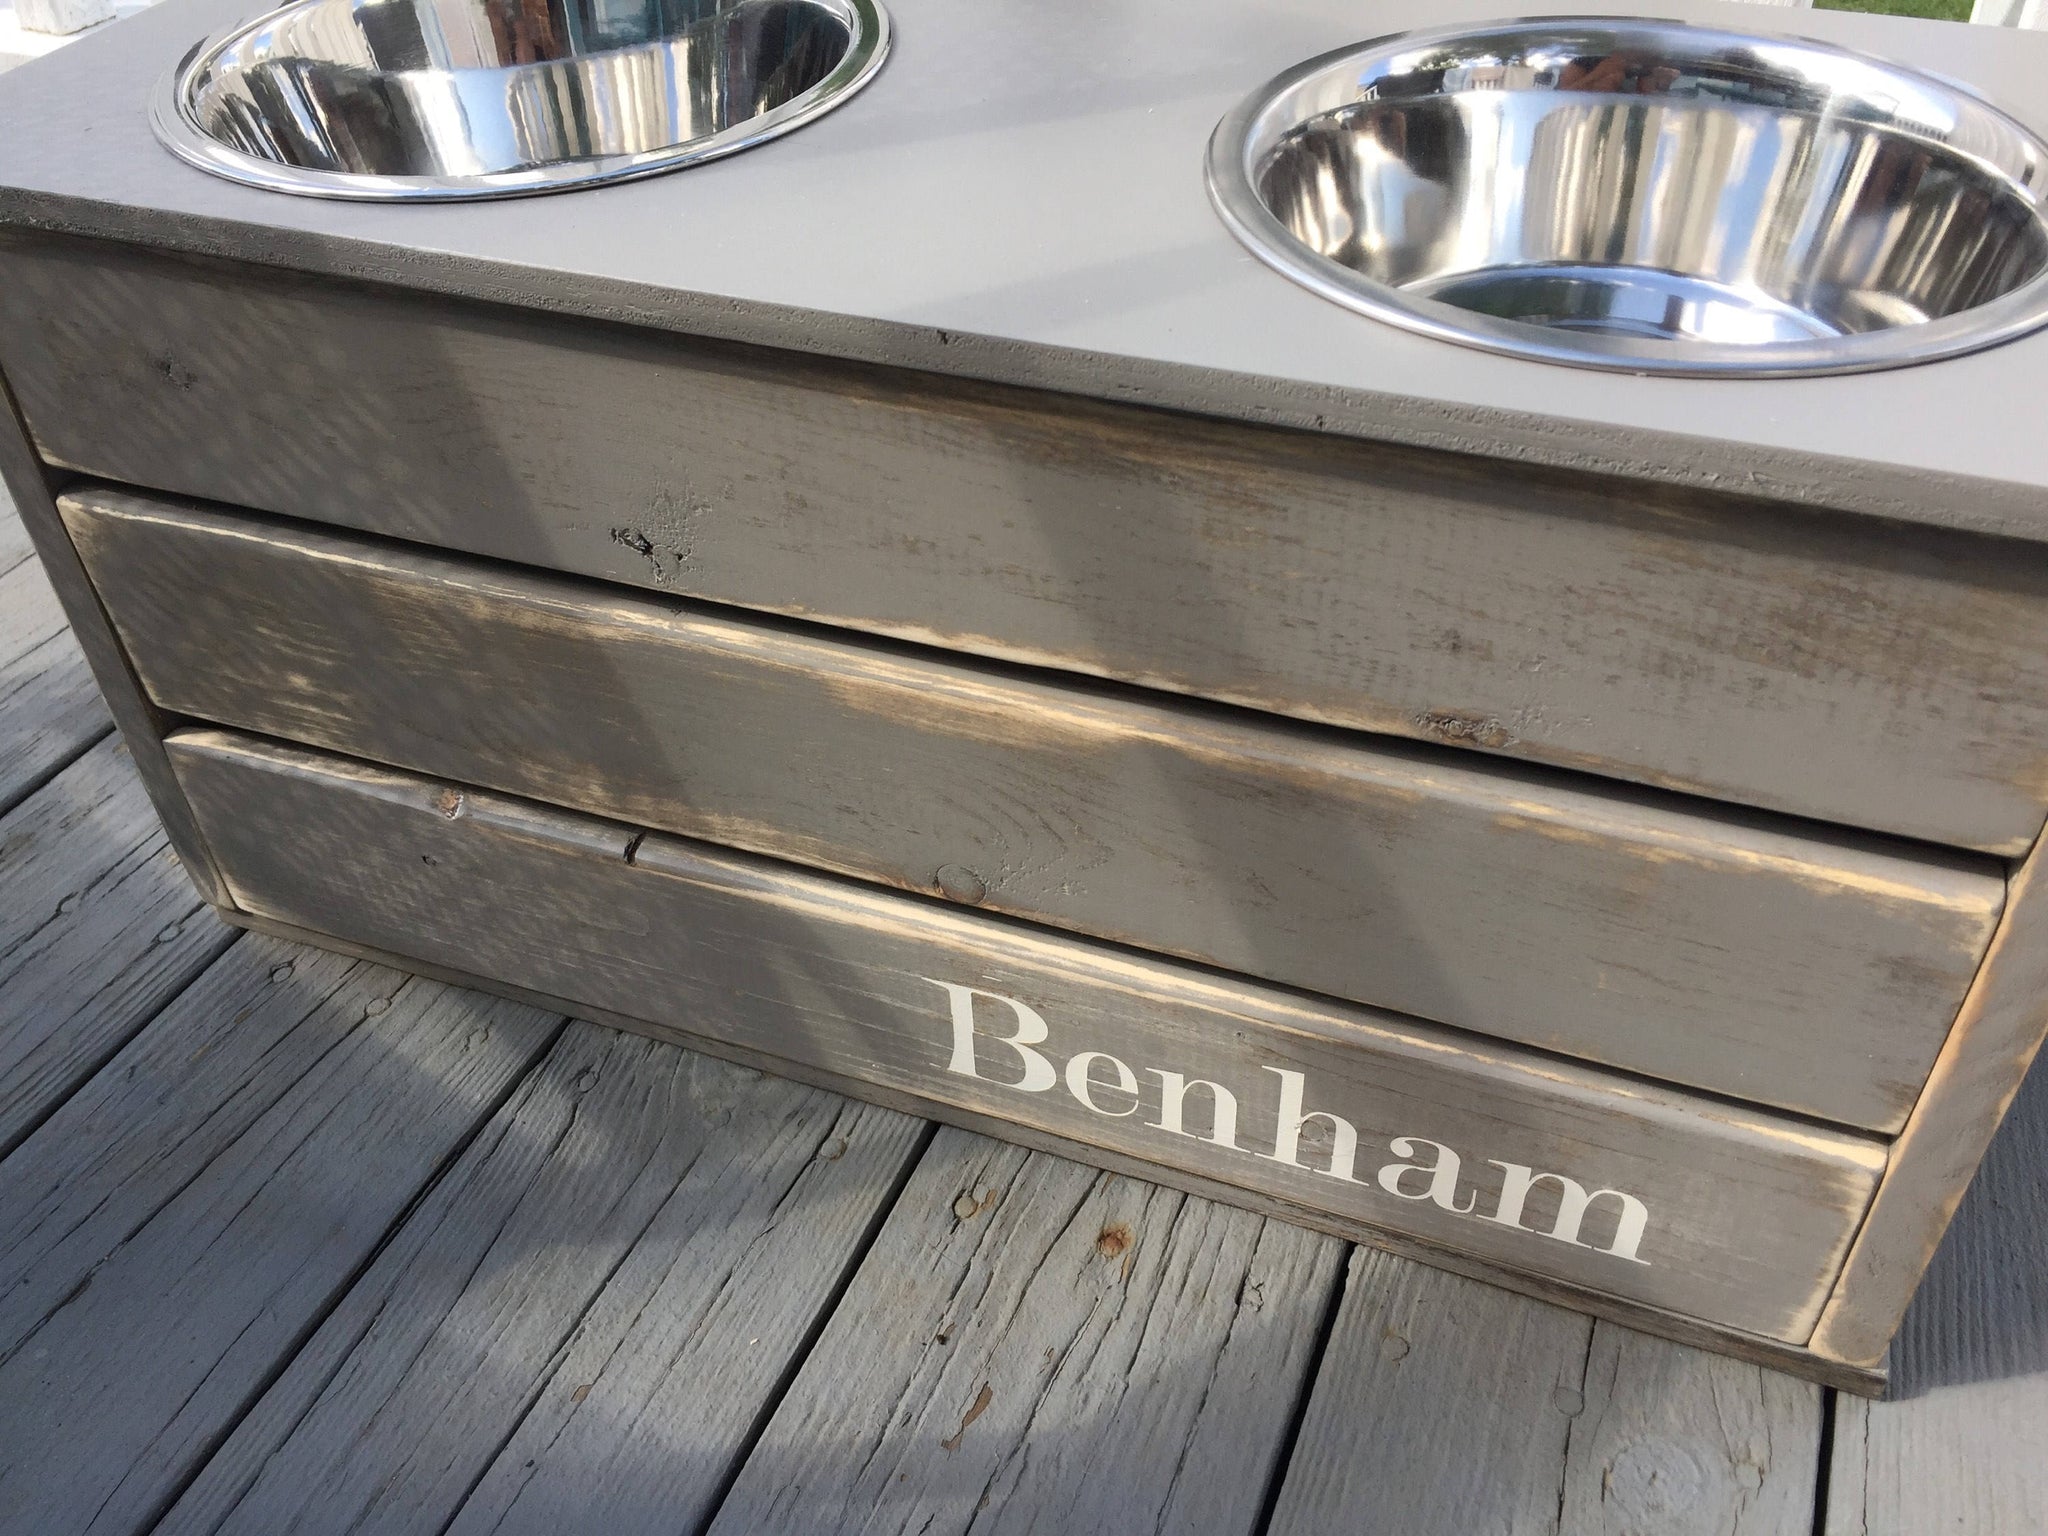 Elevated Dog Bowl Feeders With Storage